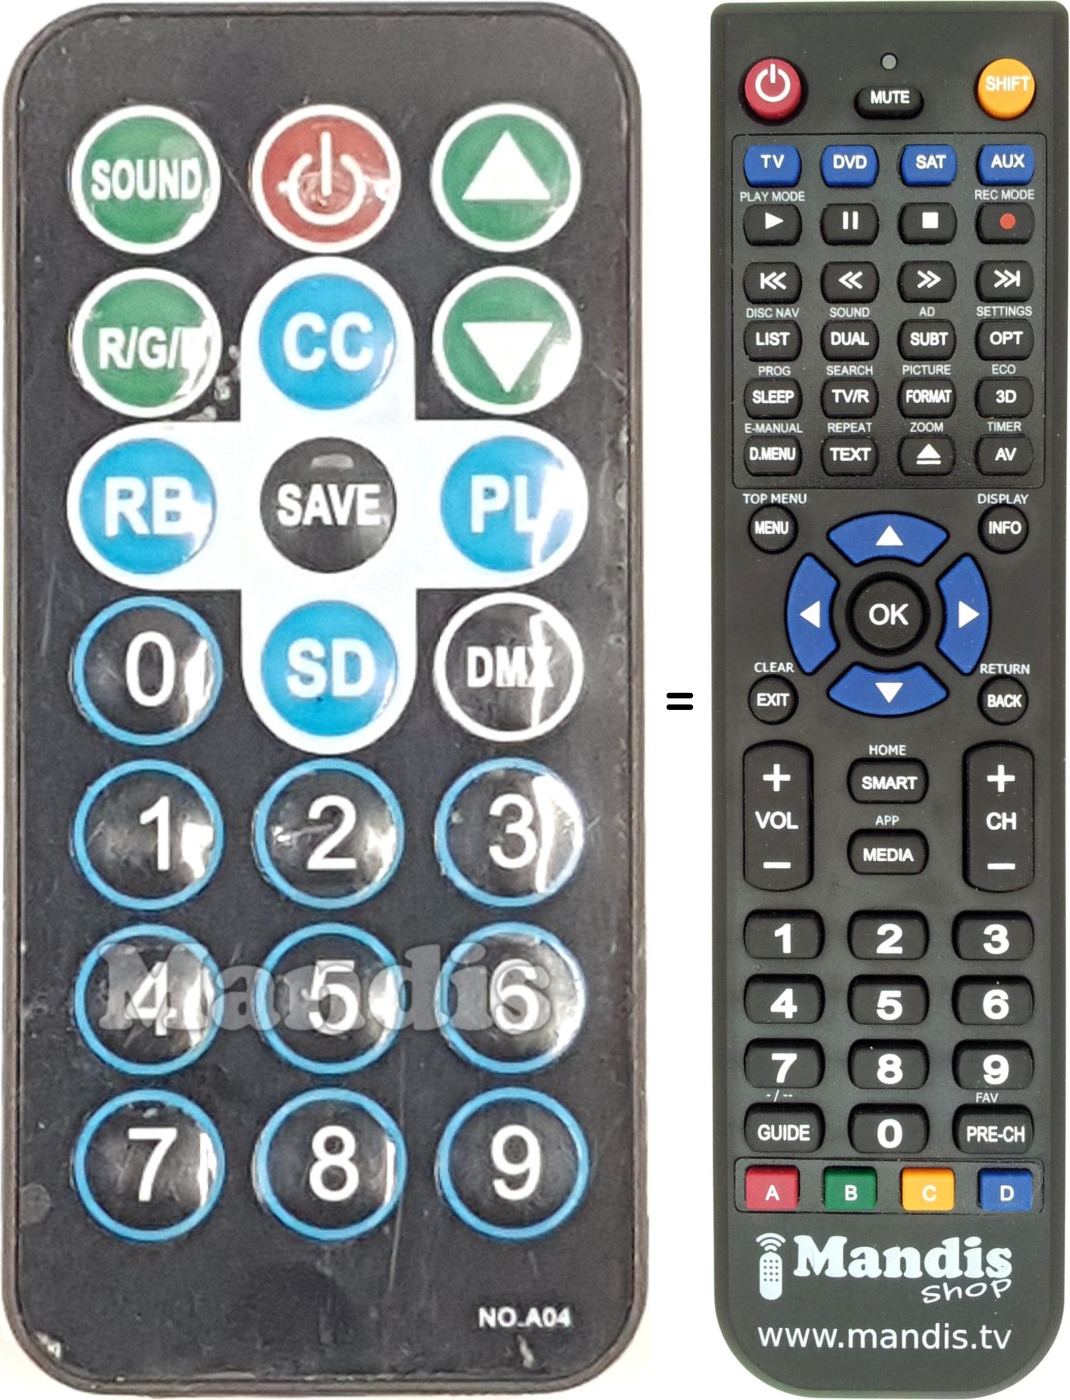 Replacement remote control NO.A04